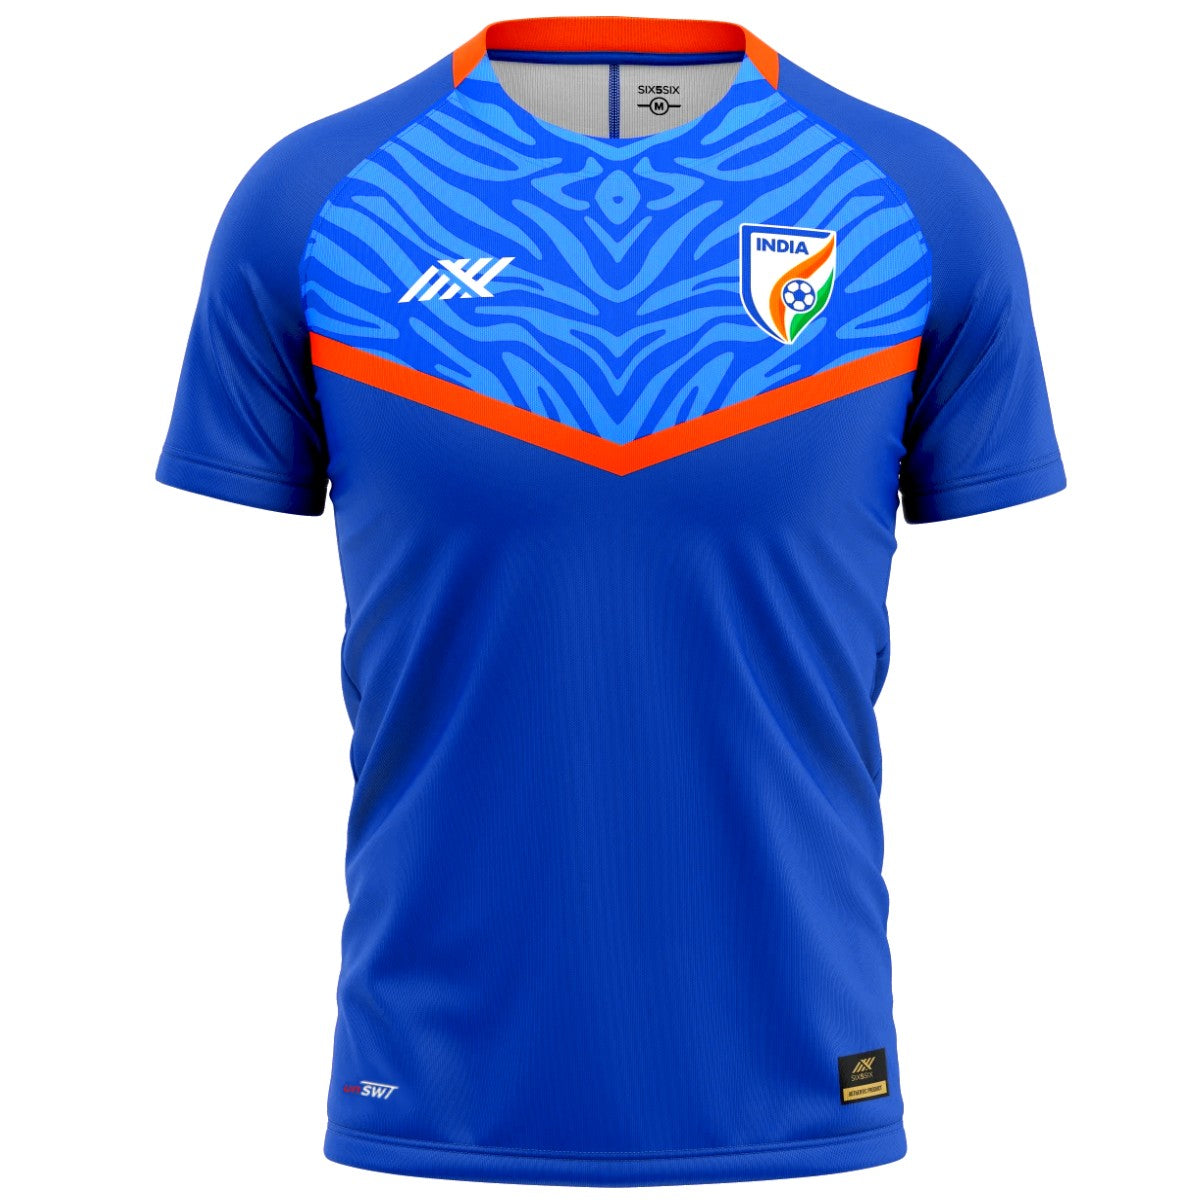 India National Team Home Soccer Jersey 2021/22 - Six5six Adults Small